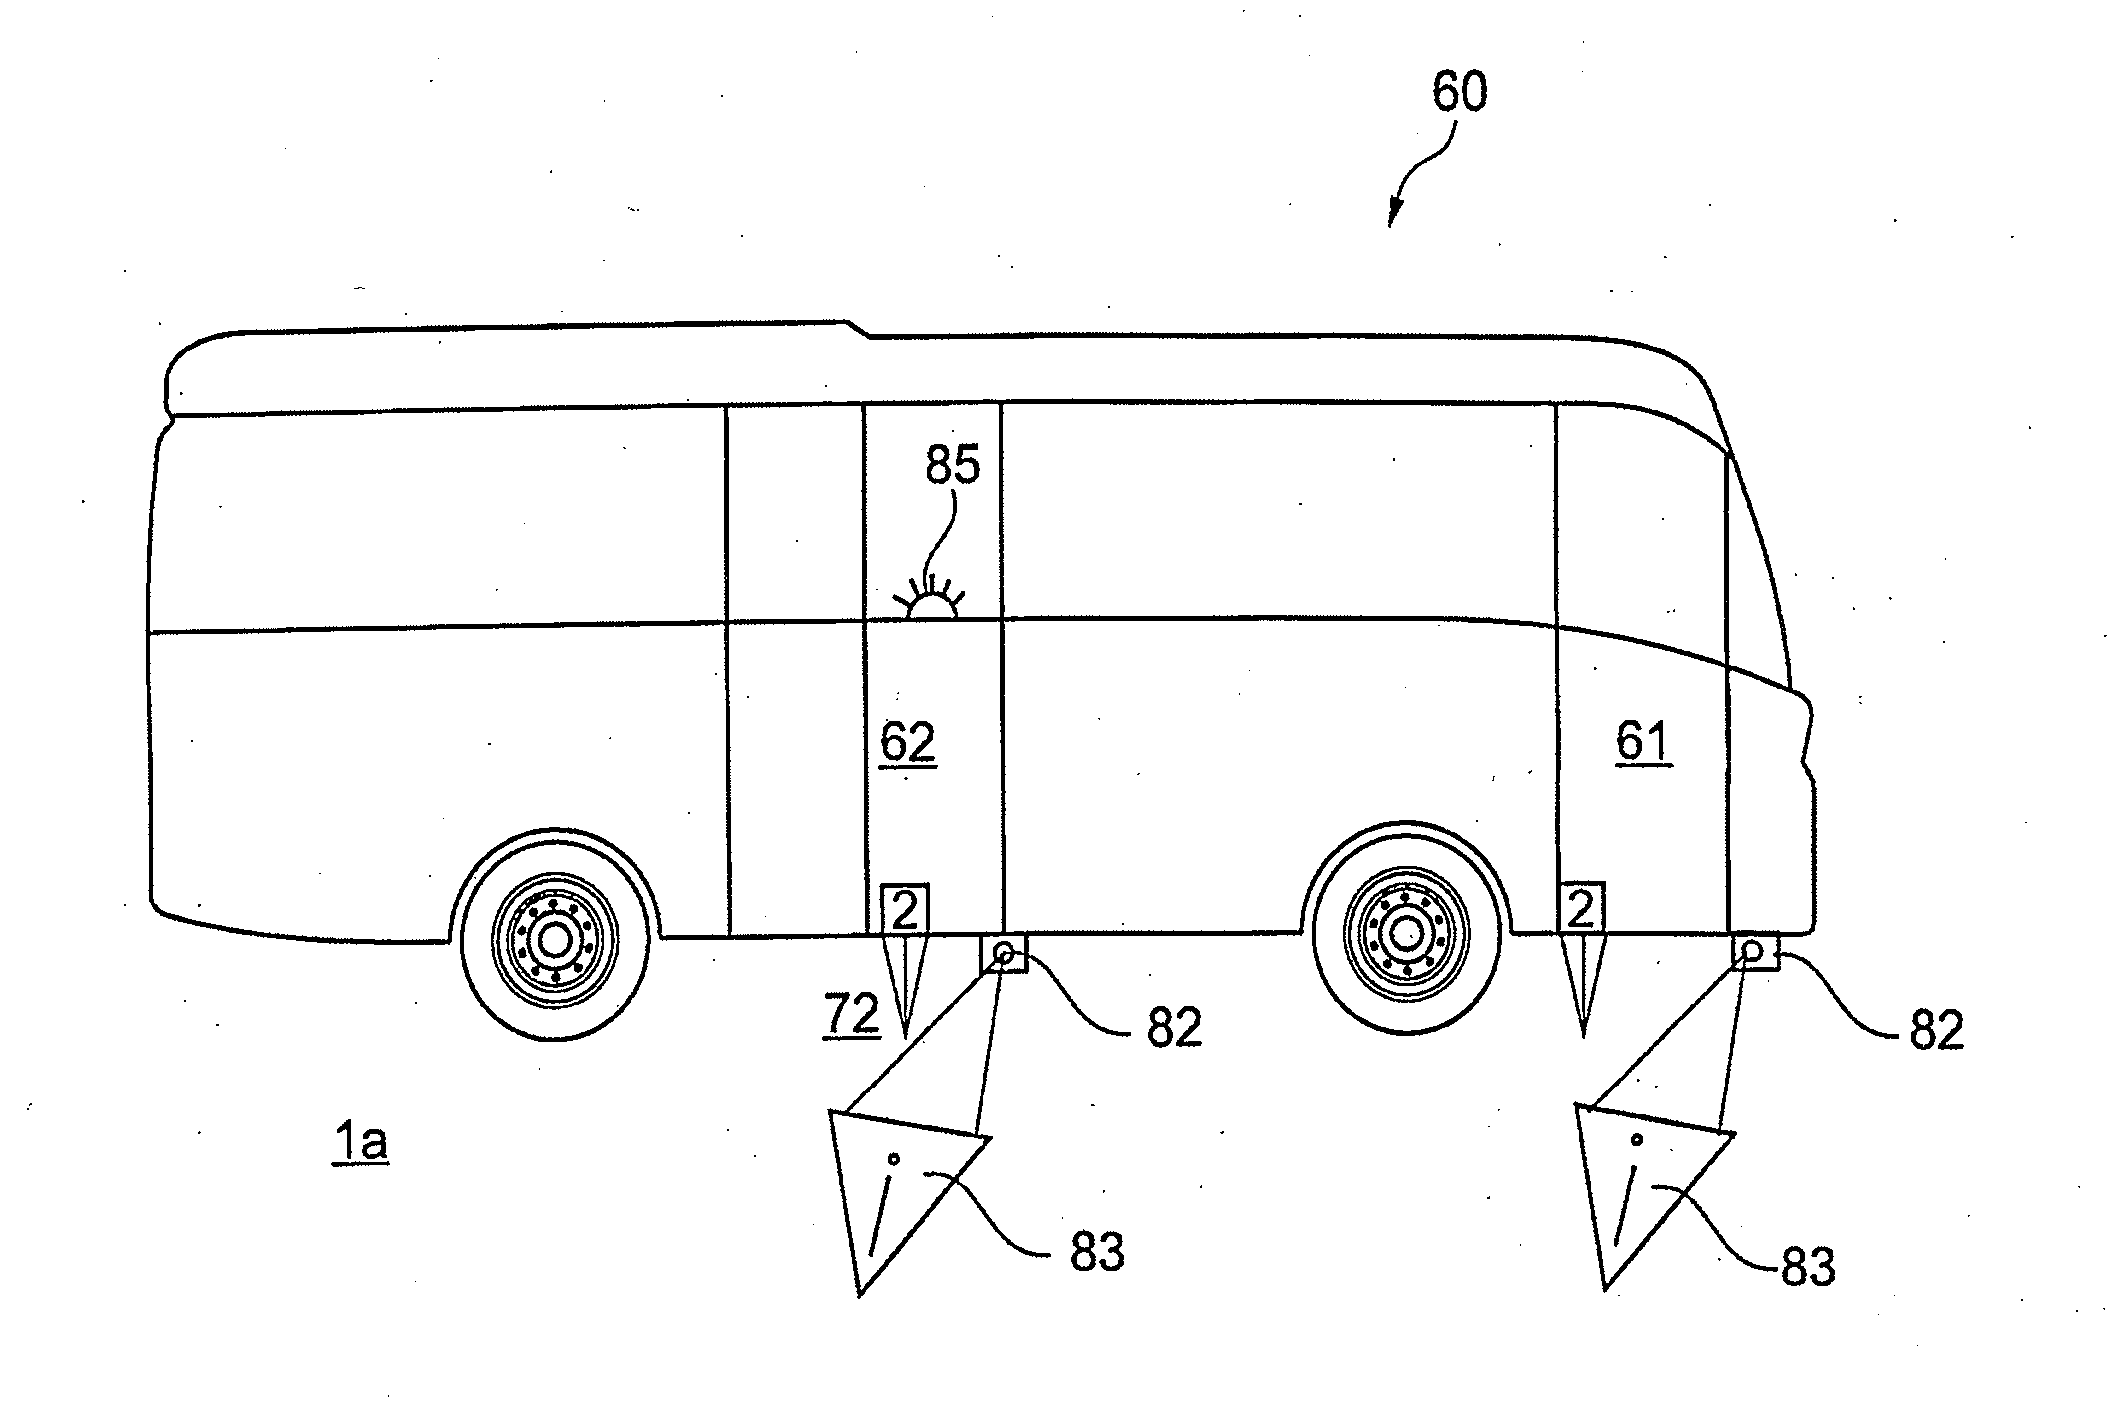 Device and Method for Outputting a Signal When There is a Hazardous Underlying Surface Under a Vehicle